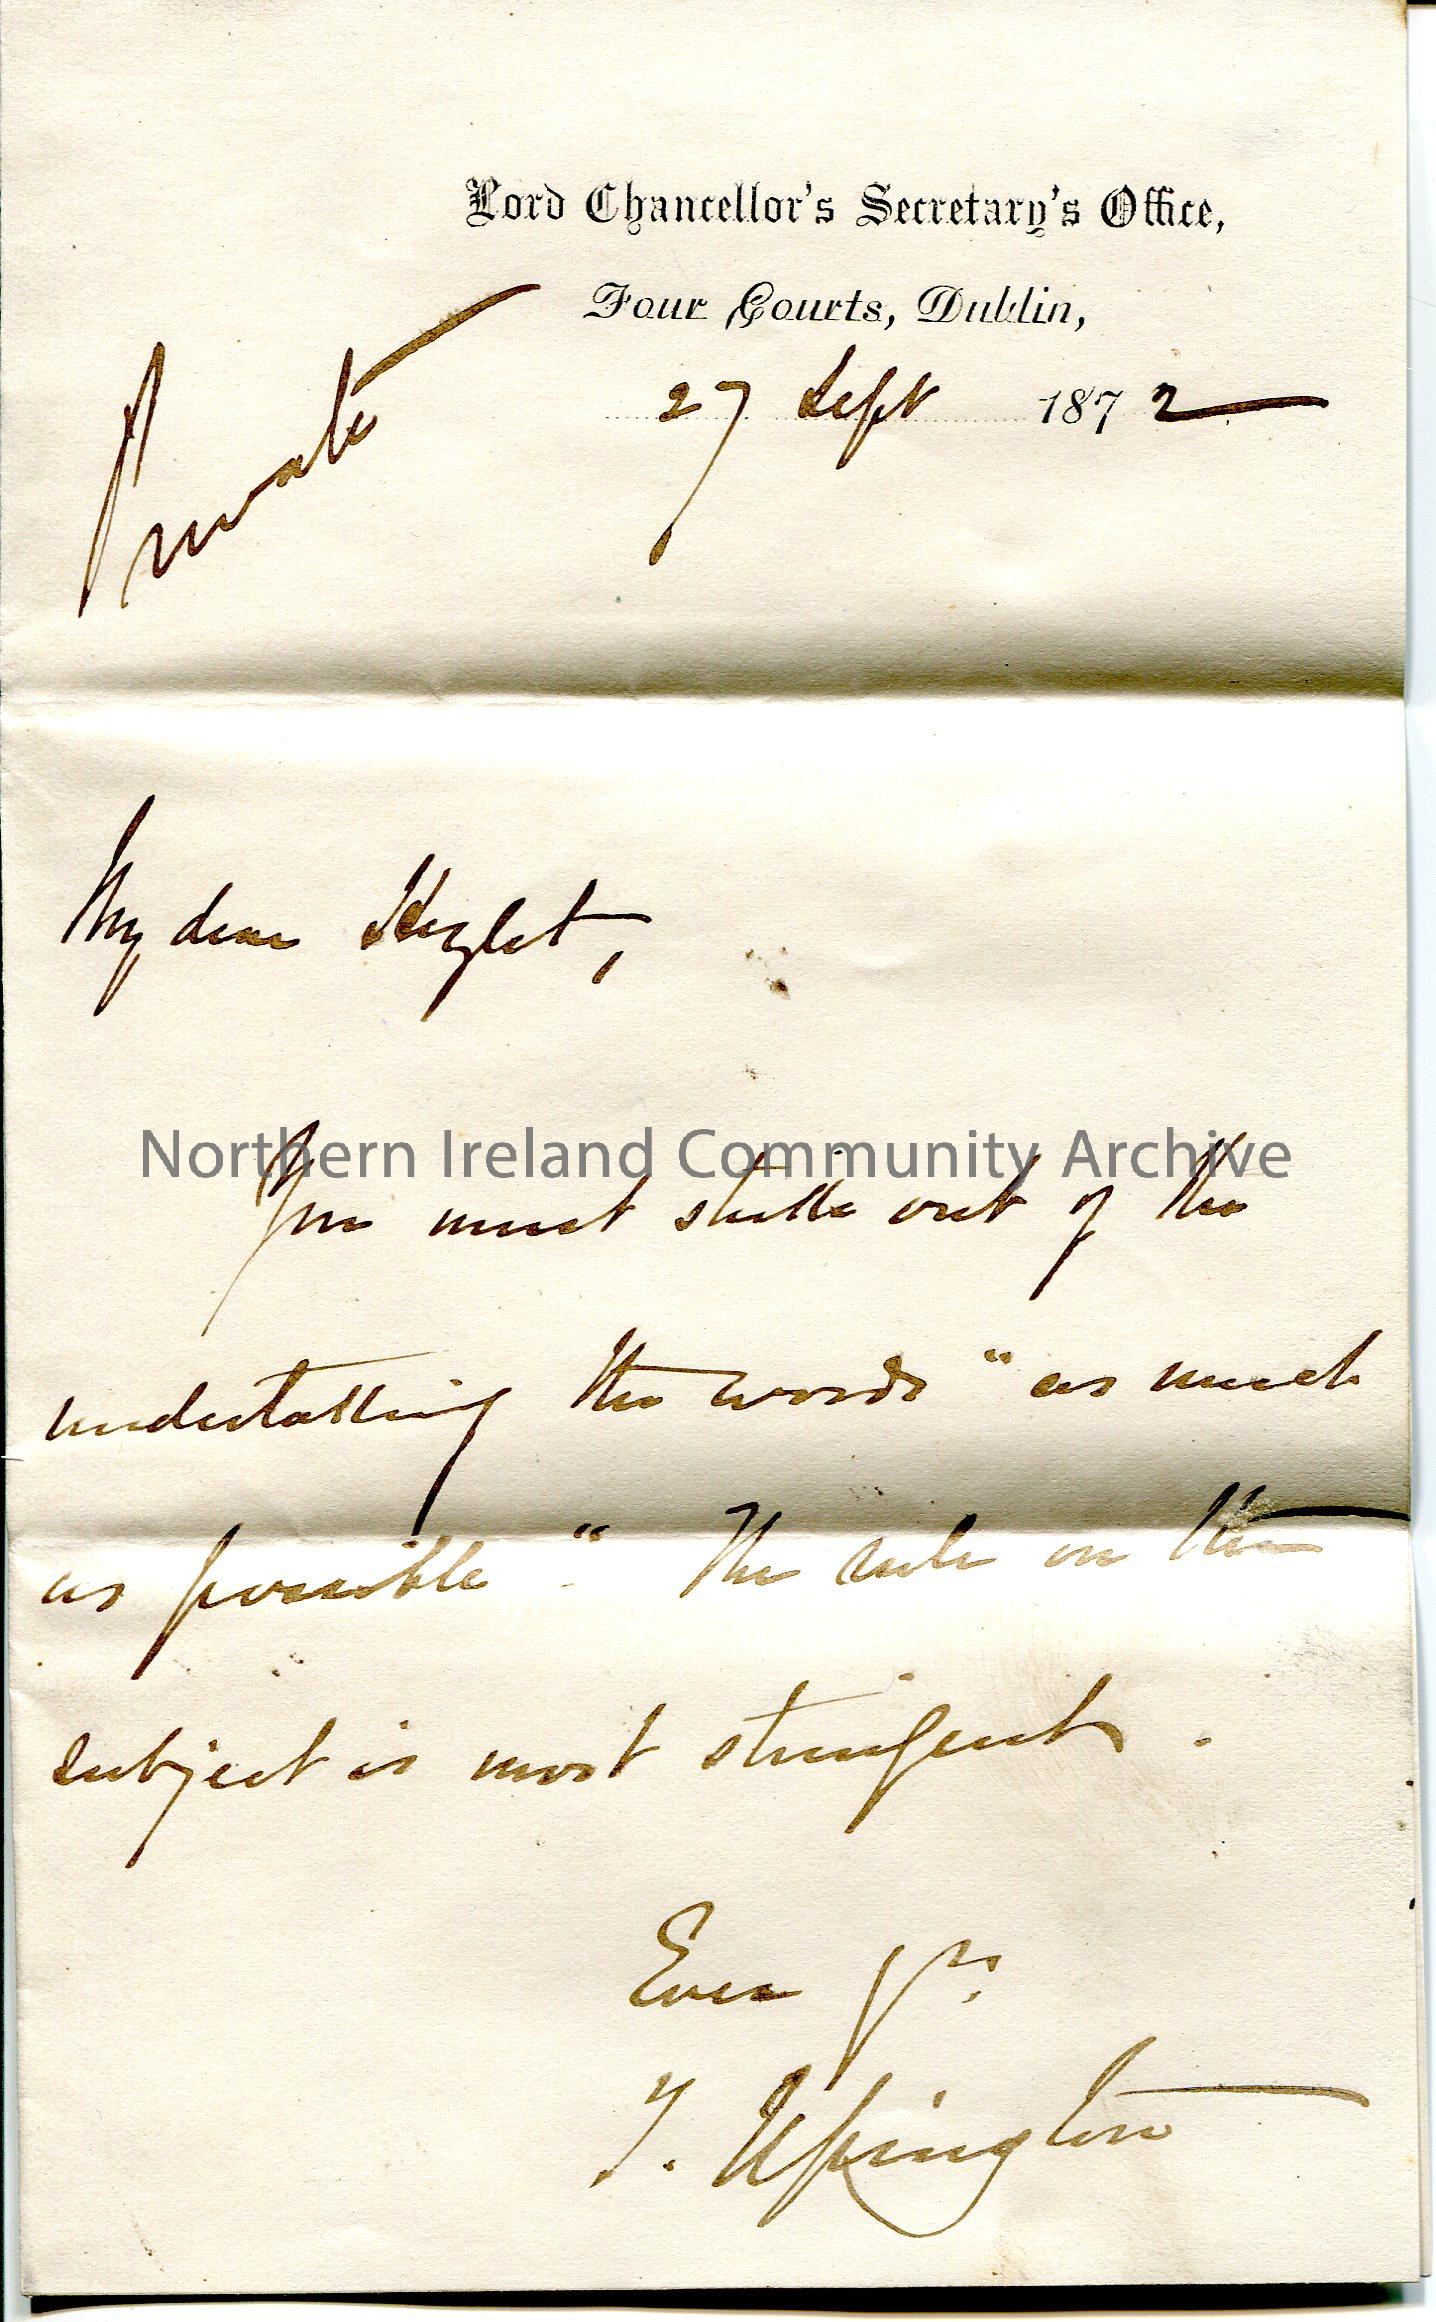 Handwritten letter to ‘My dear Hezlet’ [John]. ‘Private’ handwritten in top left corner. Asks John Hezlet to omit the words ‘as much as possible’ from…